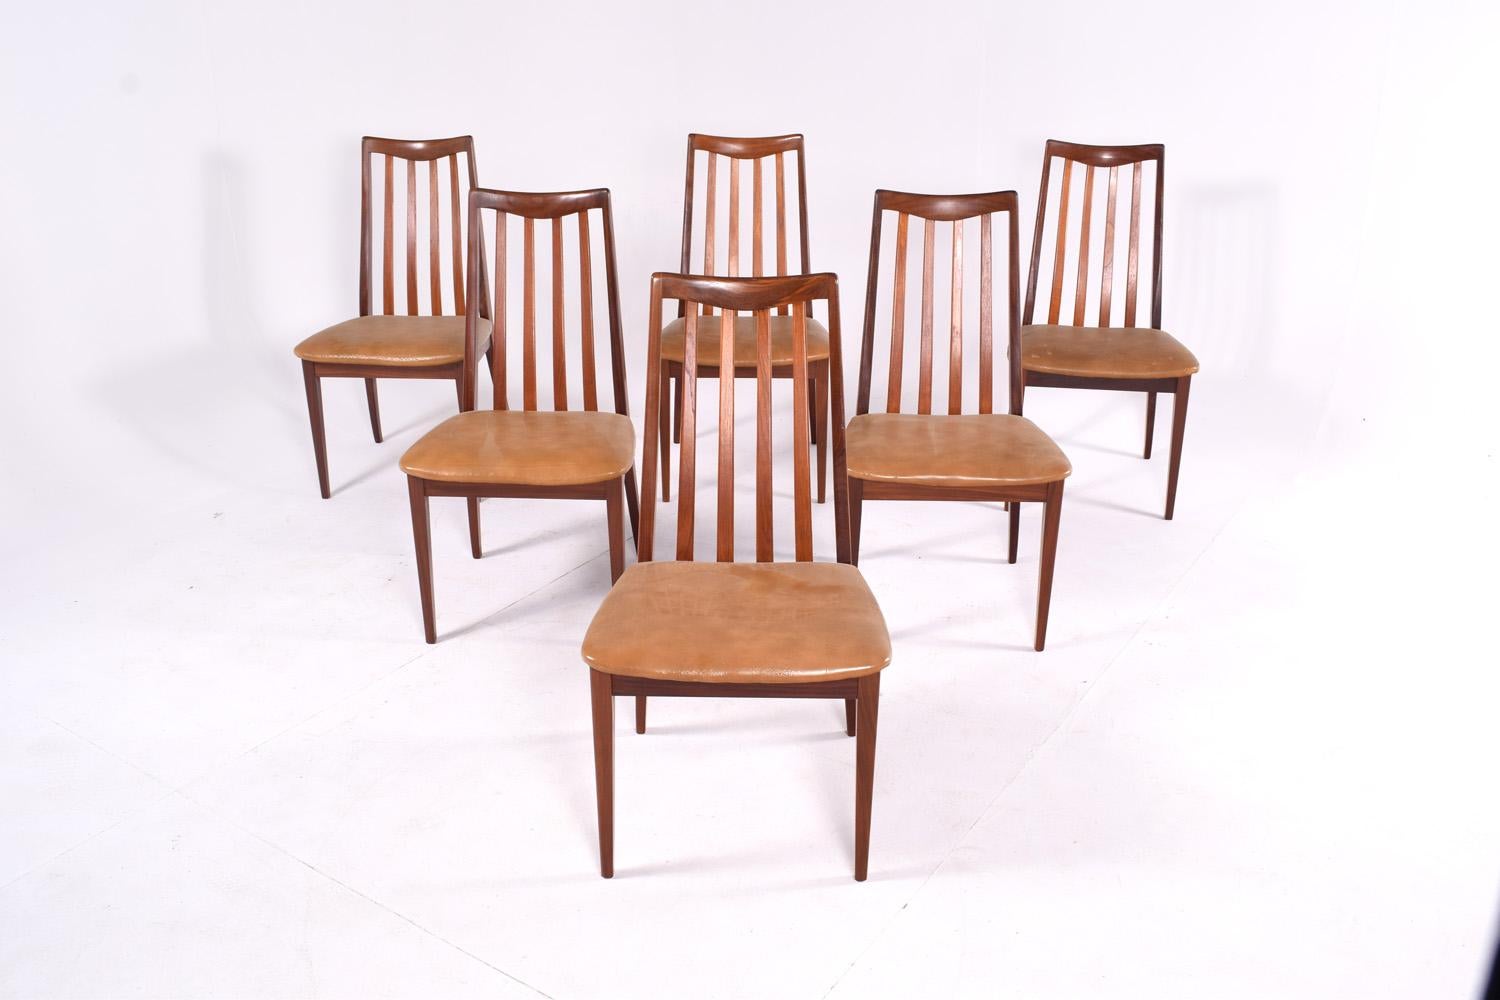 g-plan dining chairs